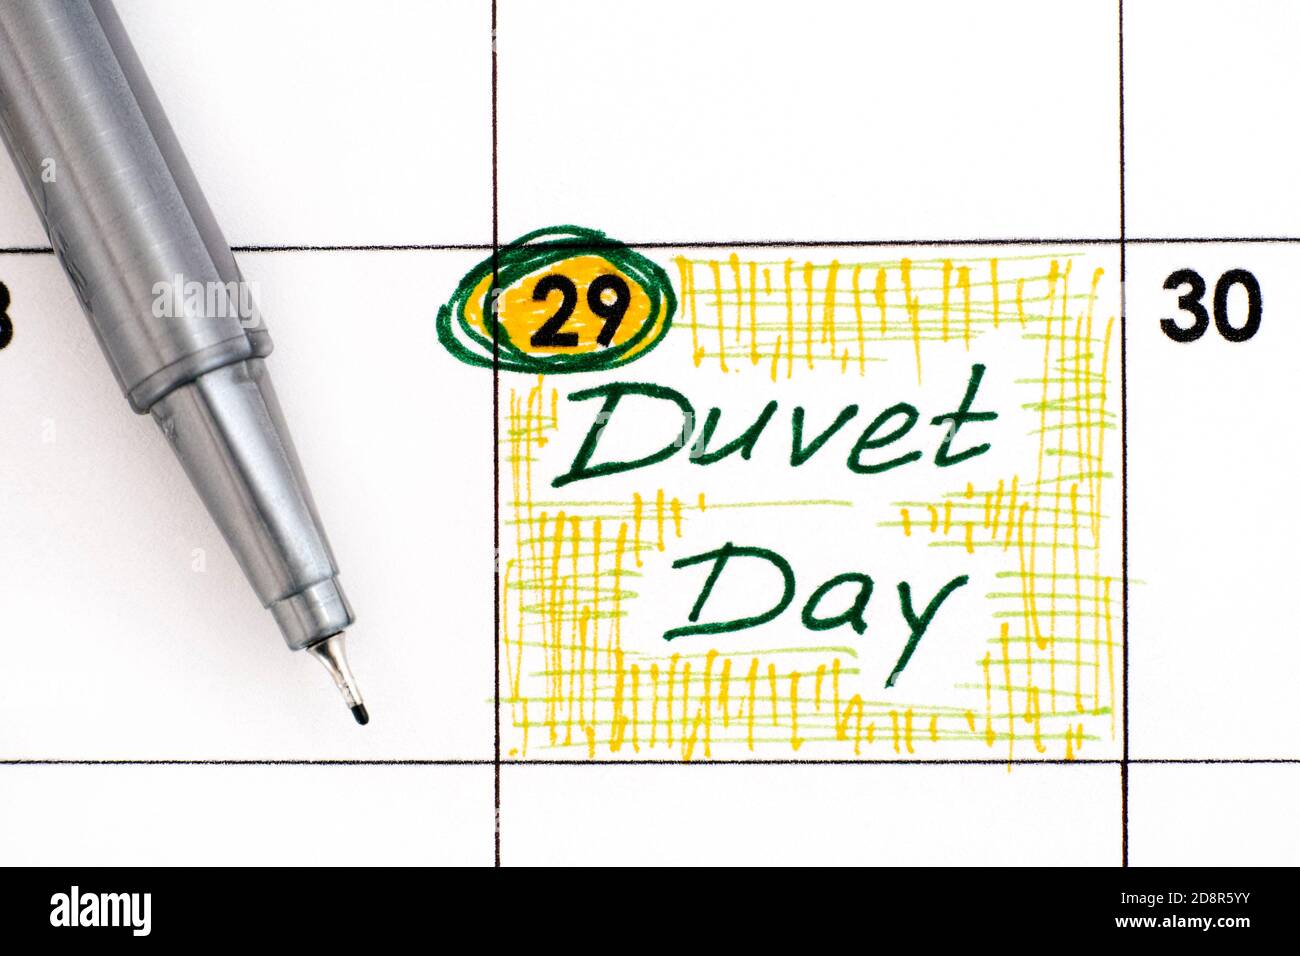 Reminder Duvet Day in calendar with pen. Close-up Stock Photo